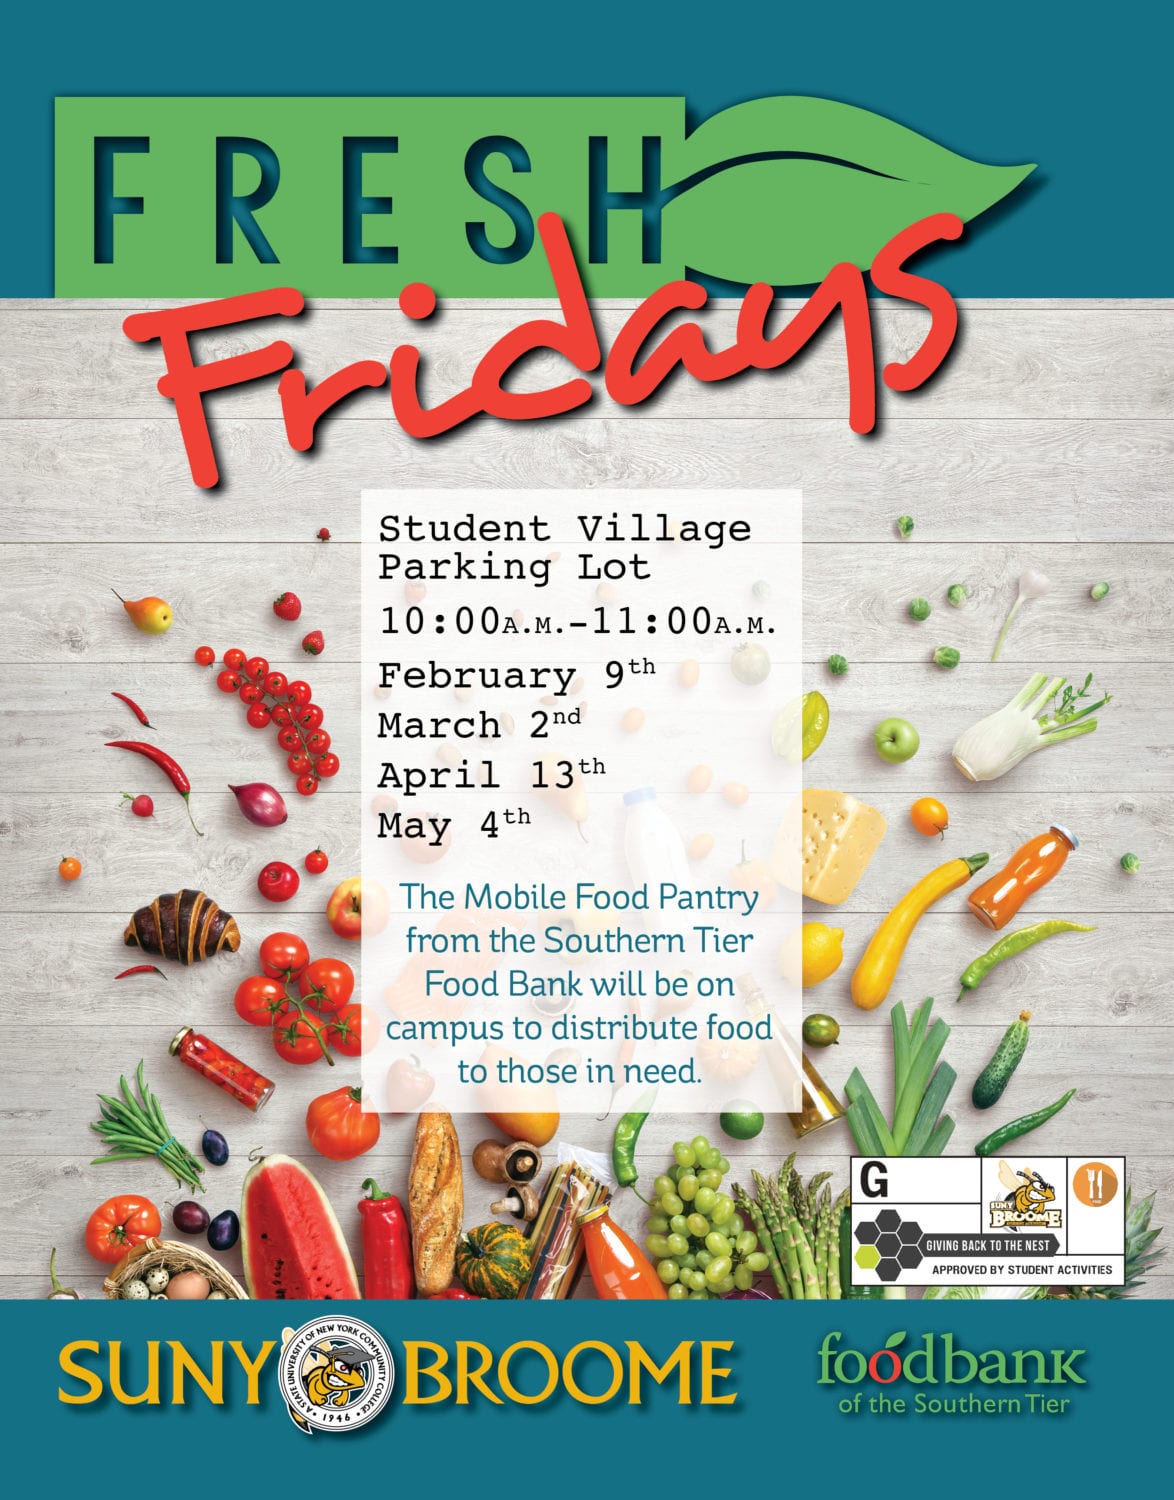 Need food? Fresh Fridays comes to campus April 13 and May 4